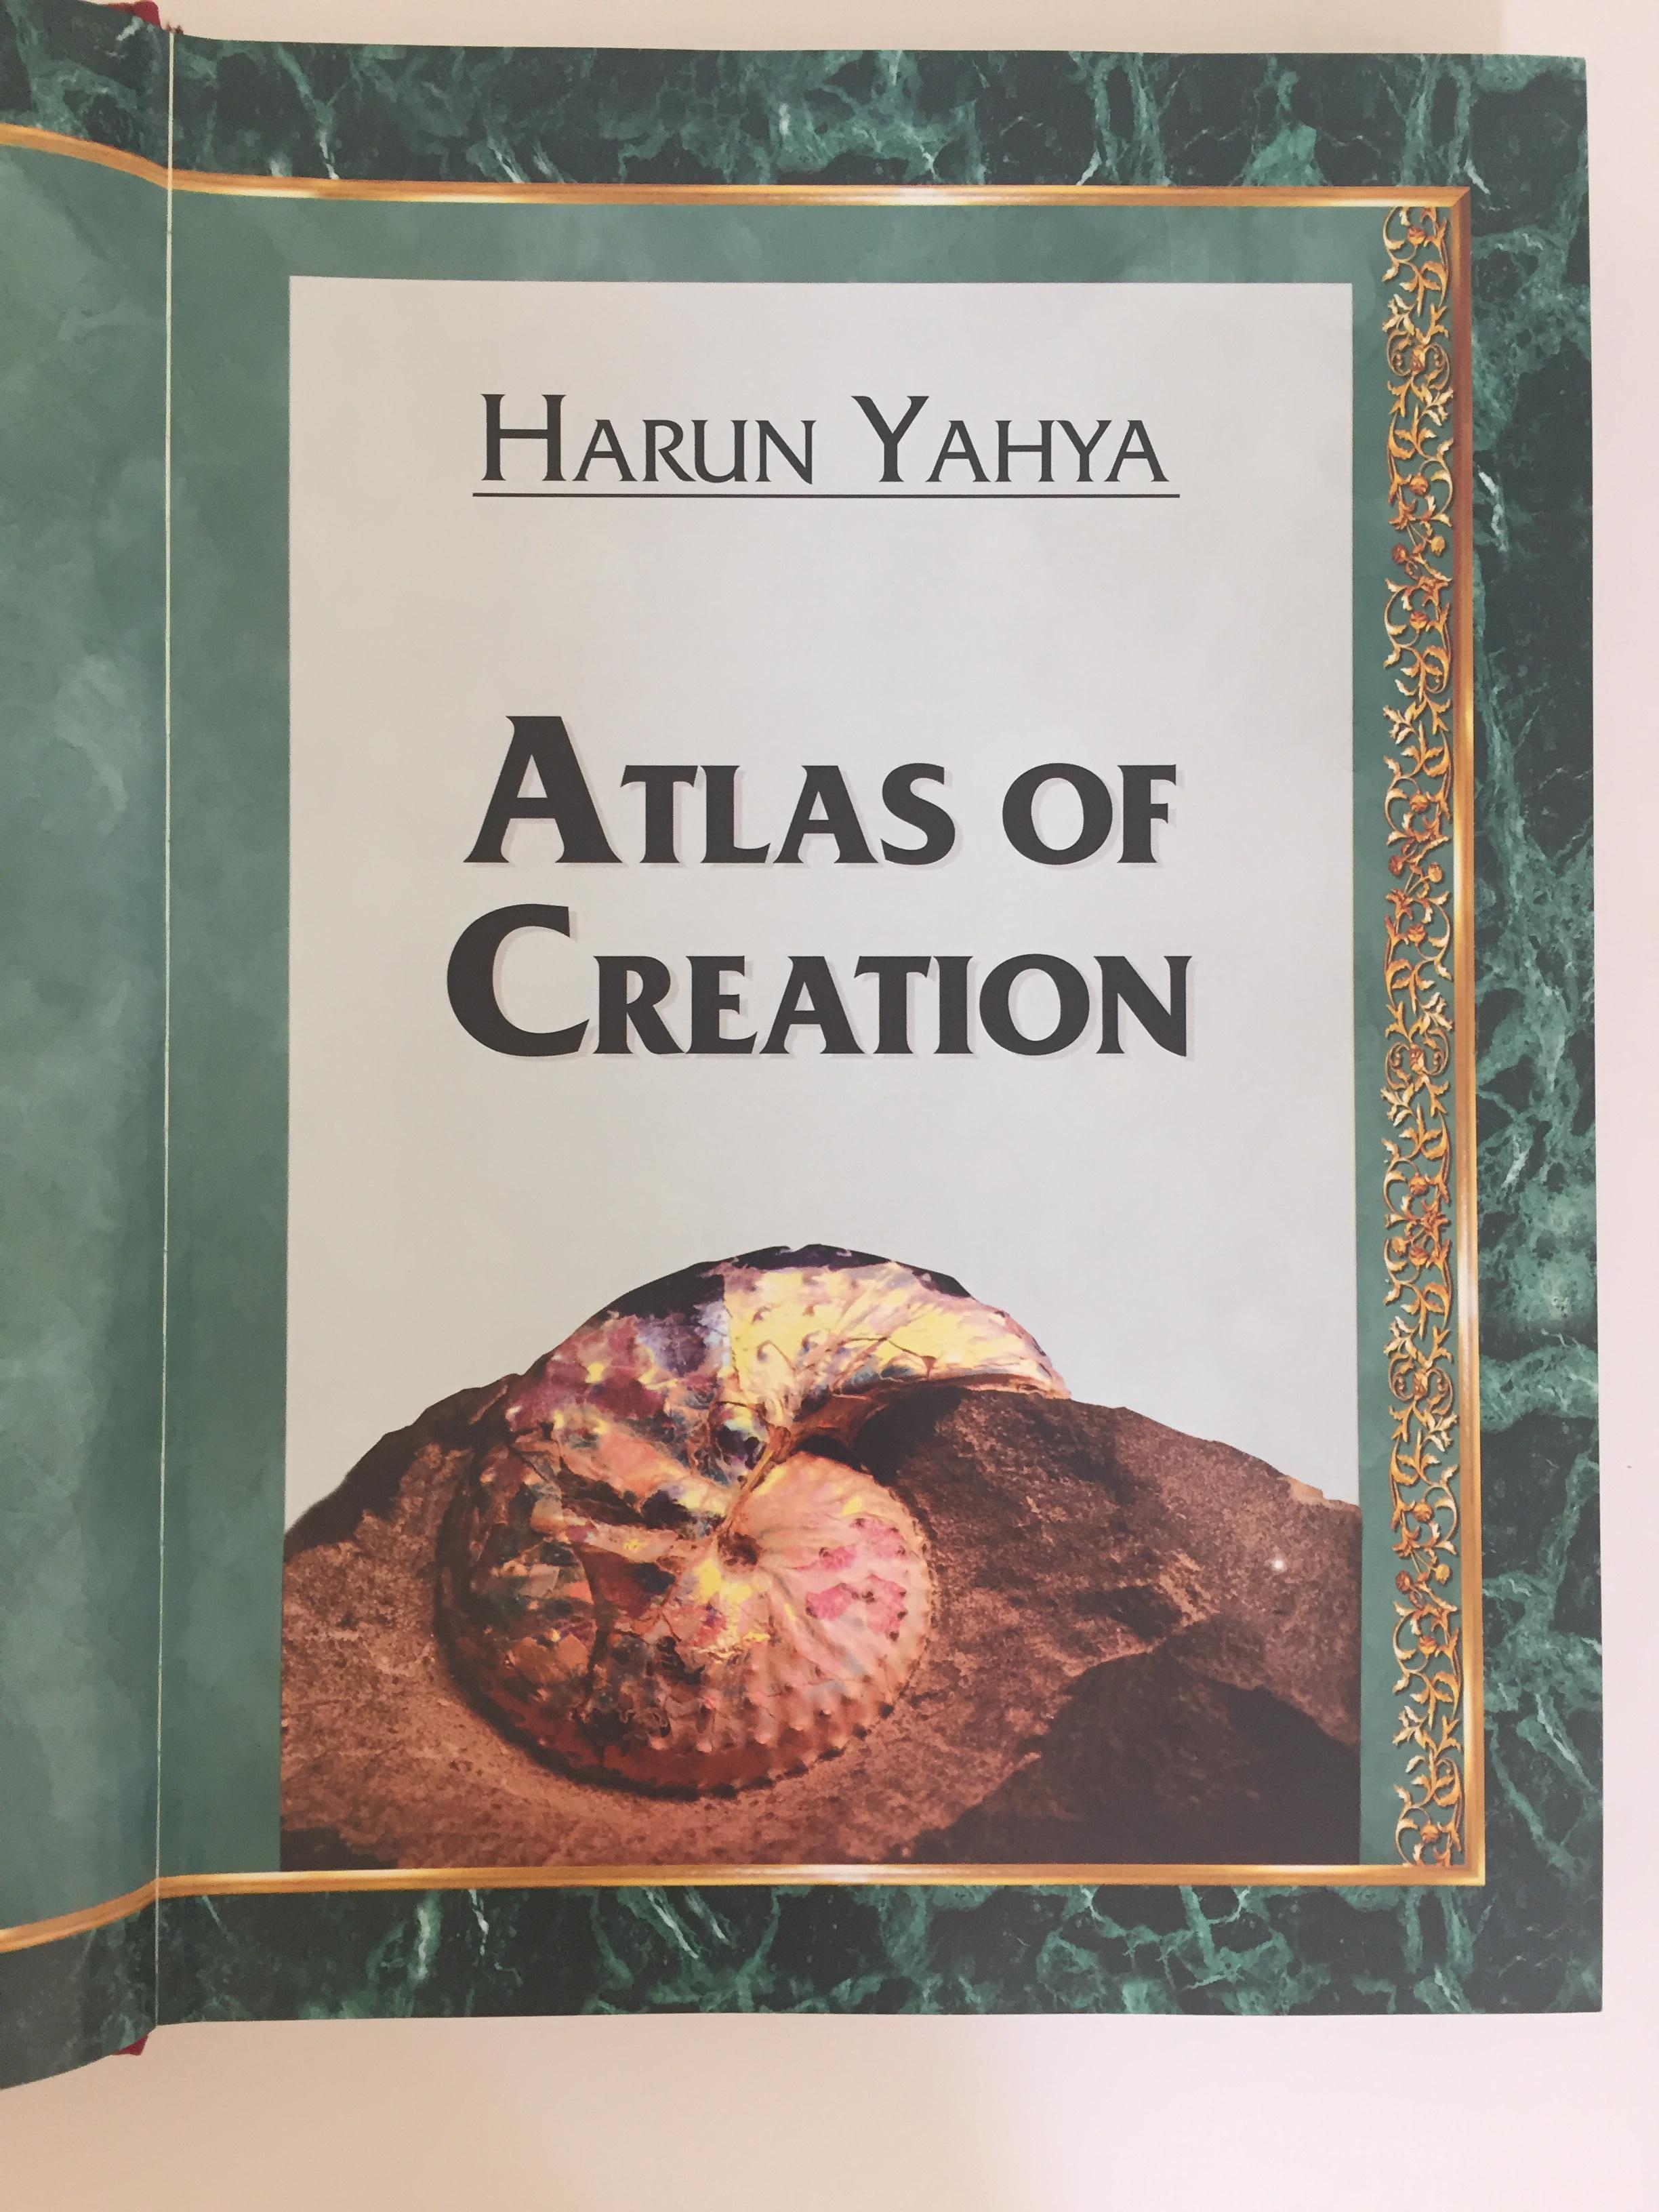 Hand-Crafted Atlas of Creation by Haroun Yahya Coffee Table Display Book